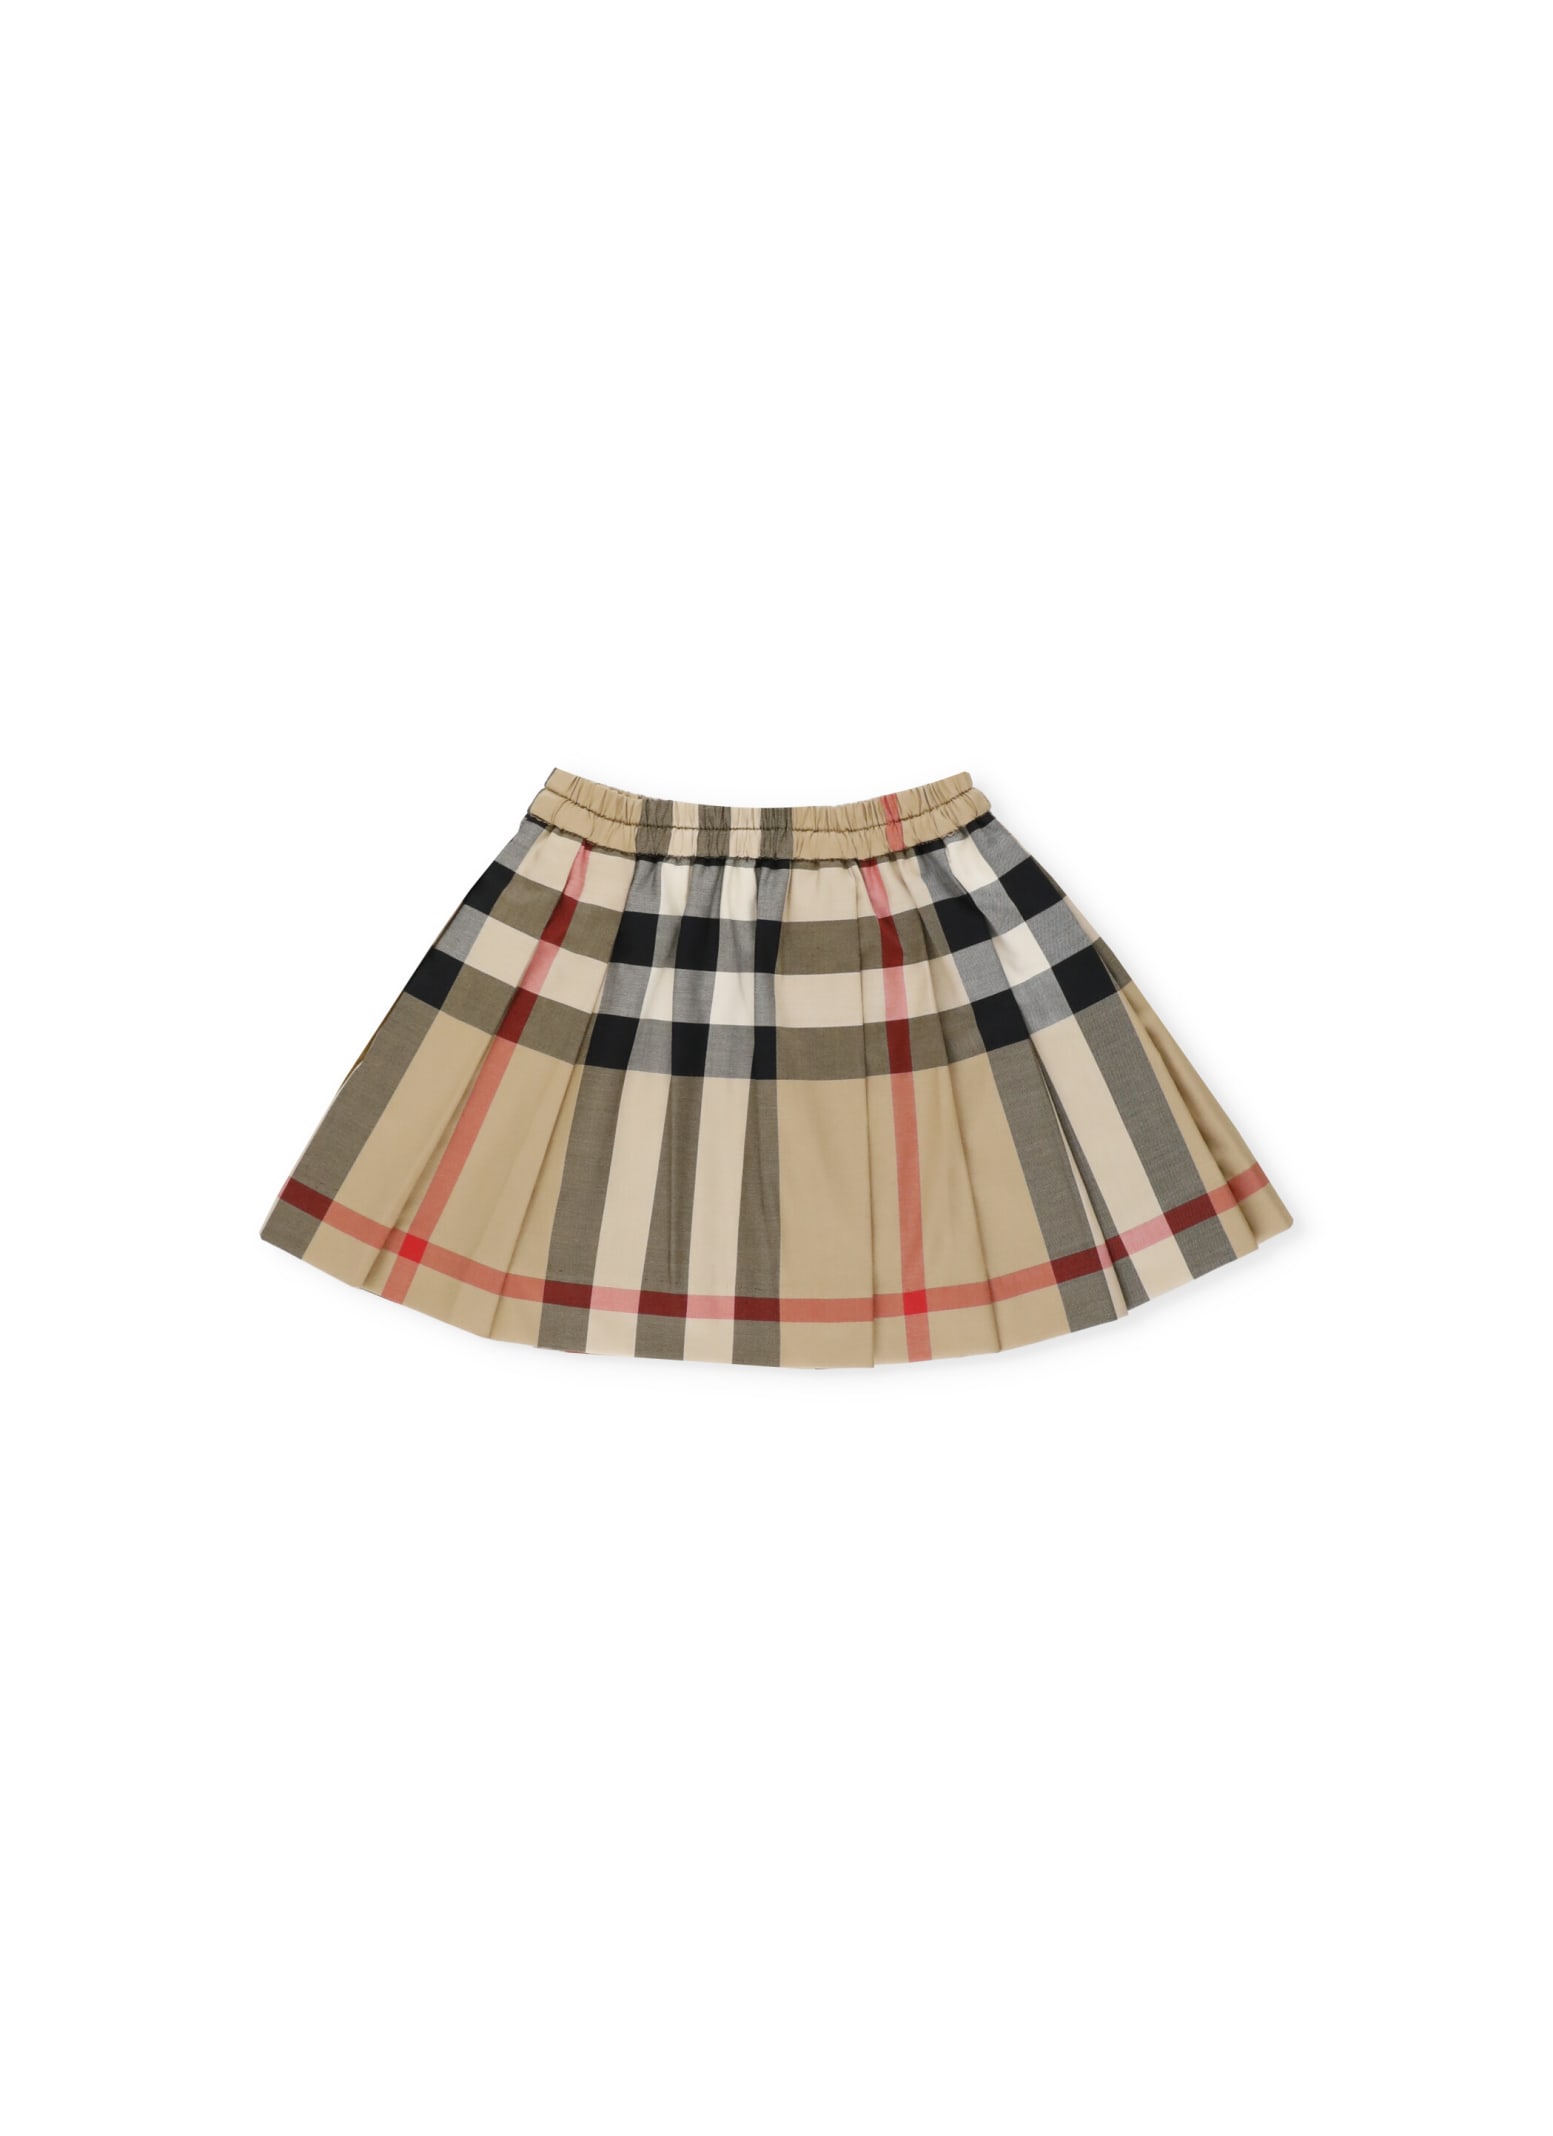 Burberry Check Pleated Skirt